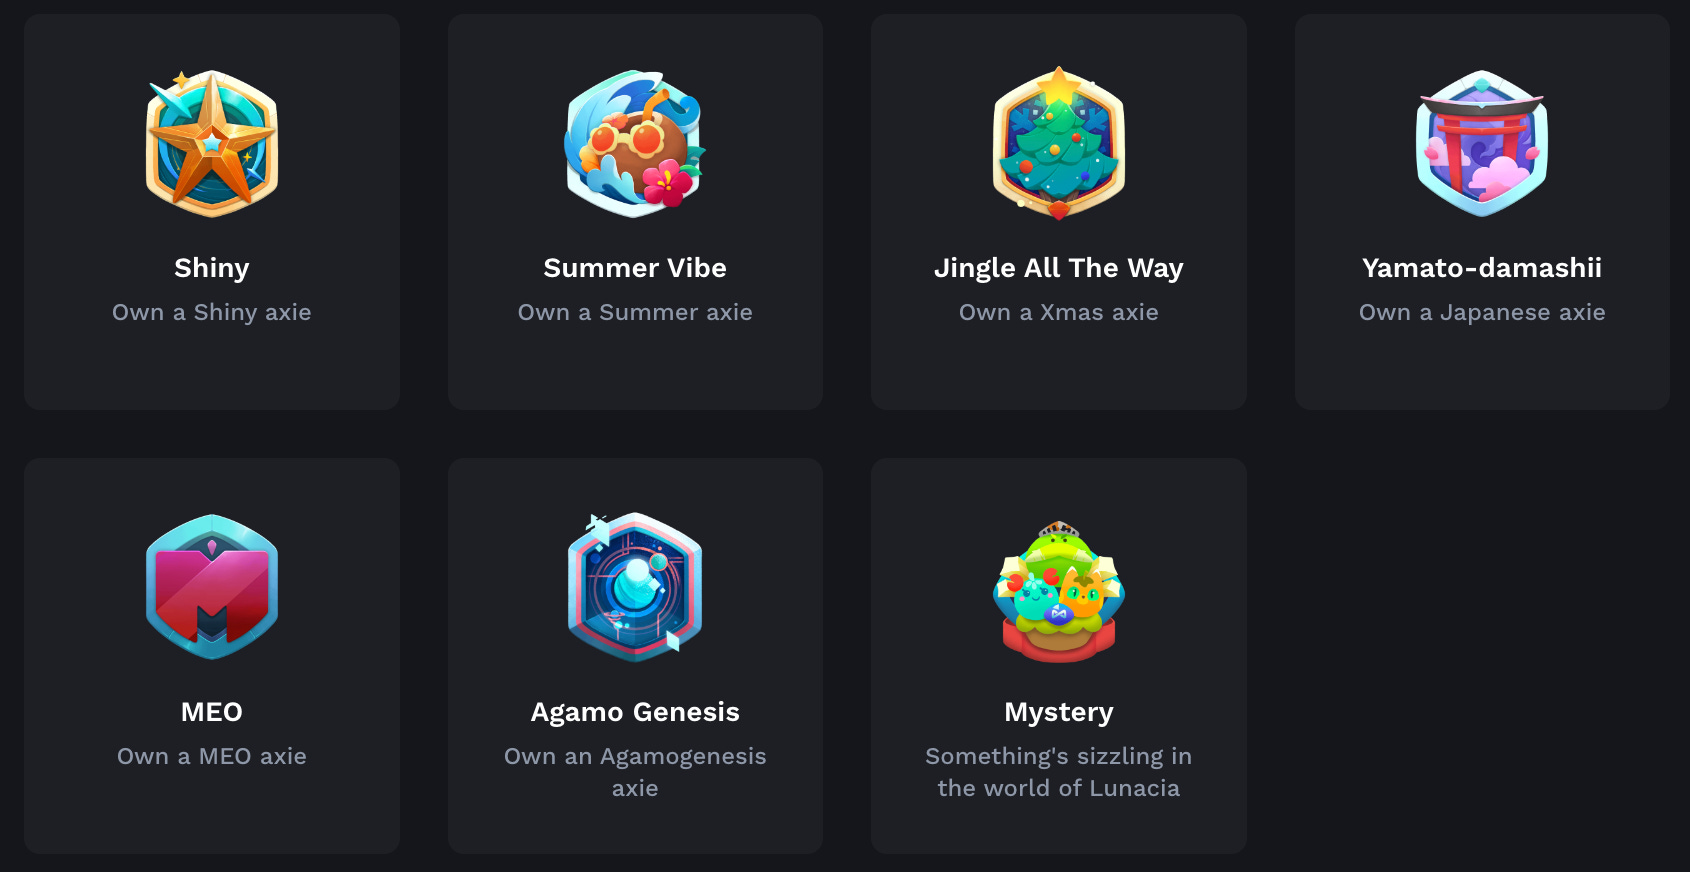 All Discord Badges and How To Get Them (2021) 